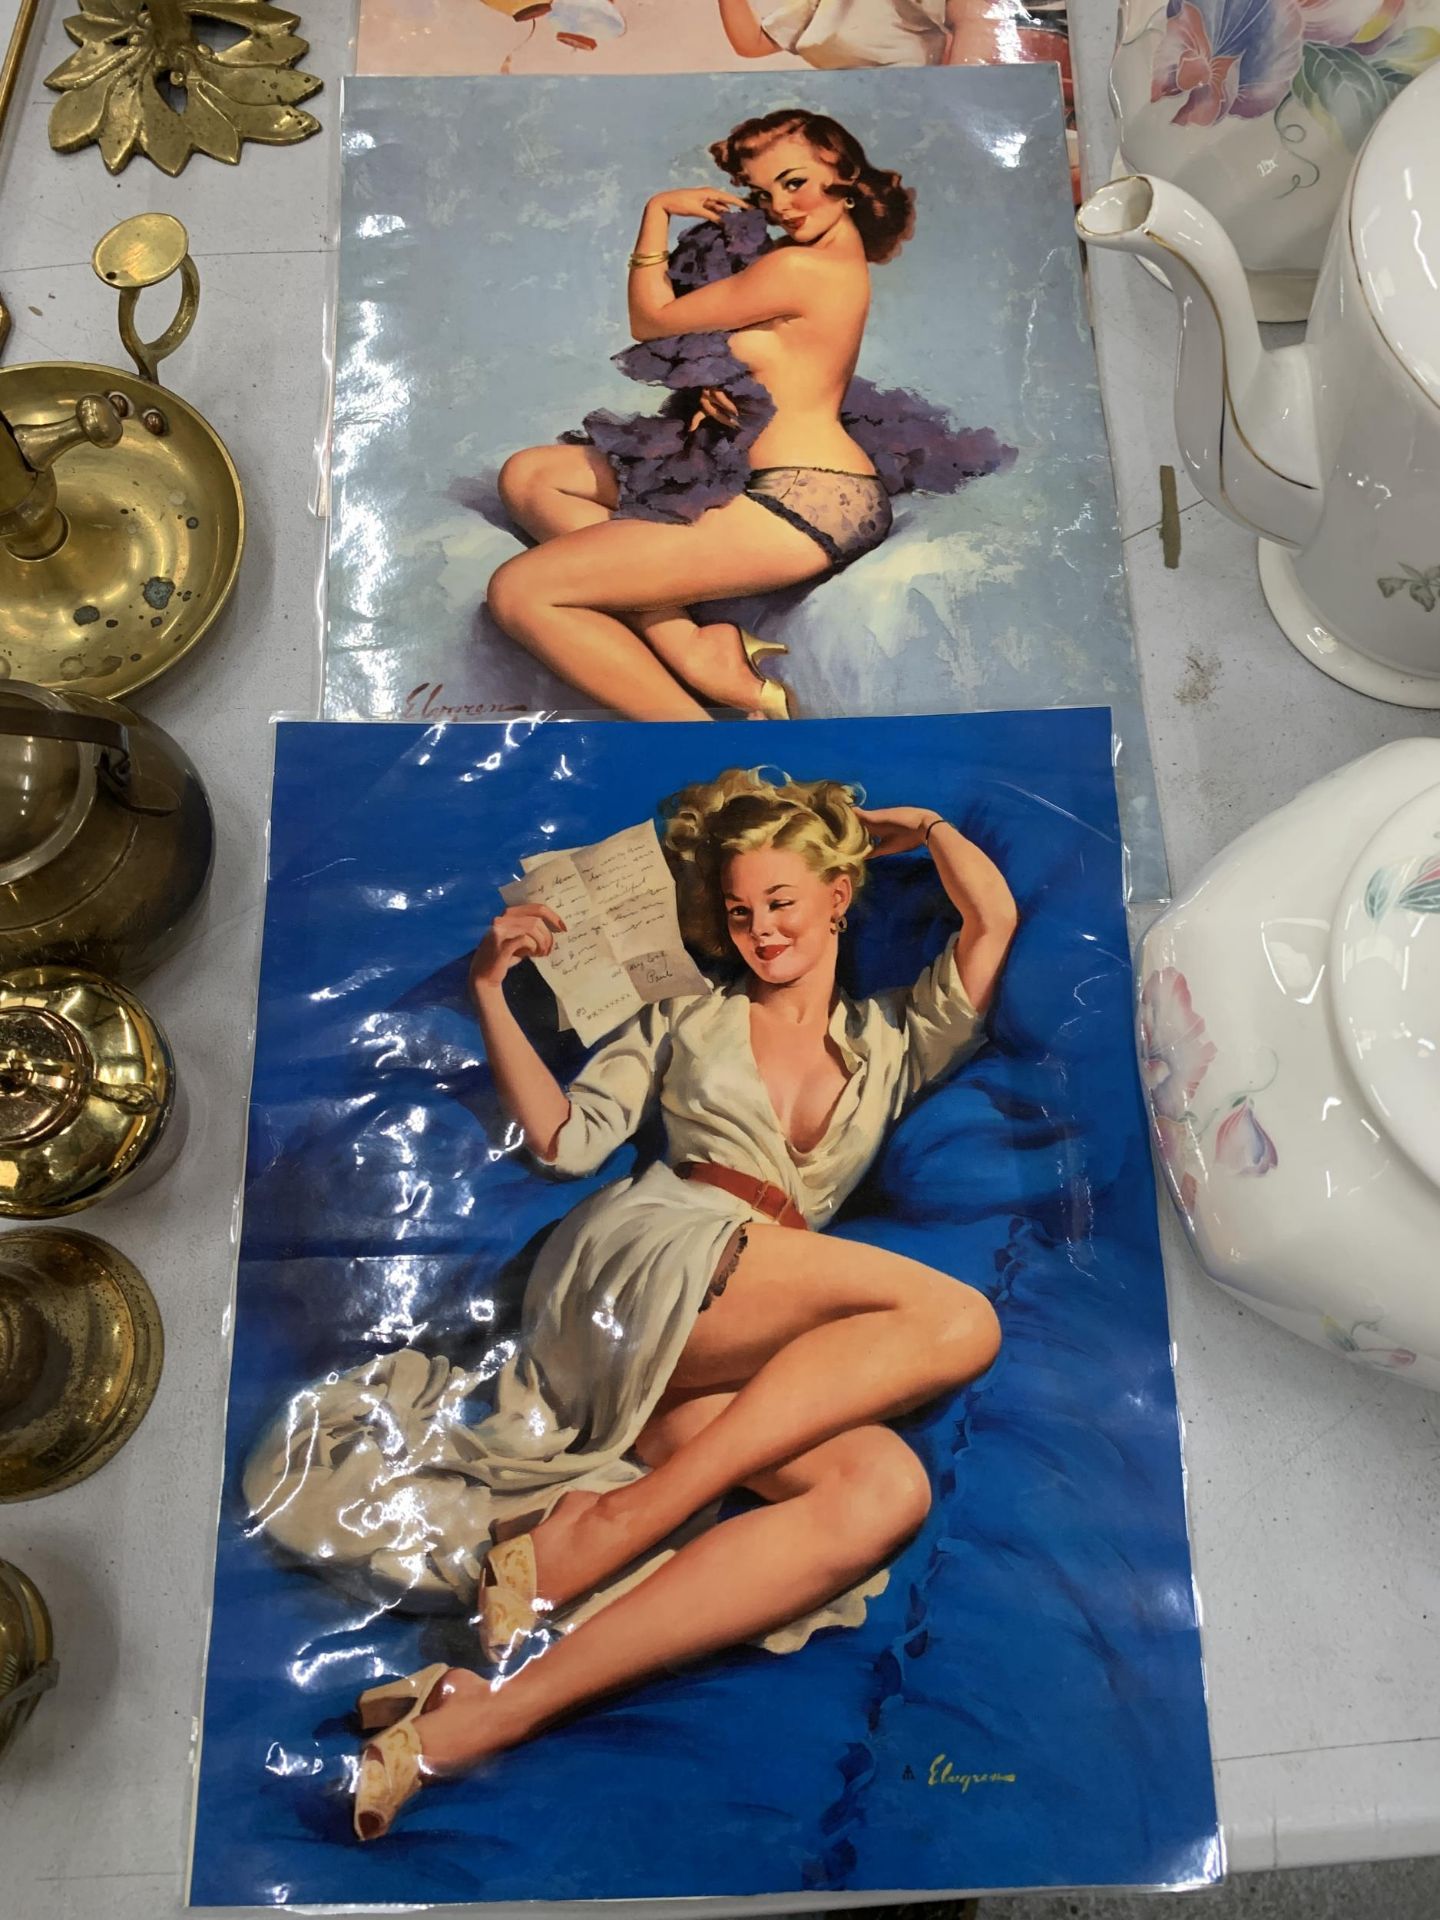 SEVEN VINTAGE PIN-UP GIRL PRINTS BY THE FRENCH ARTIST GIL ELVGREN - Image 3 of 5